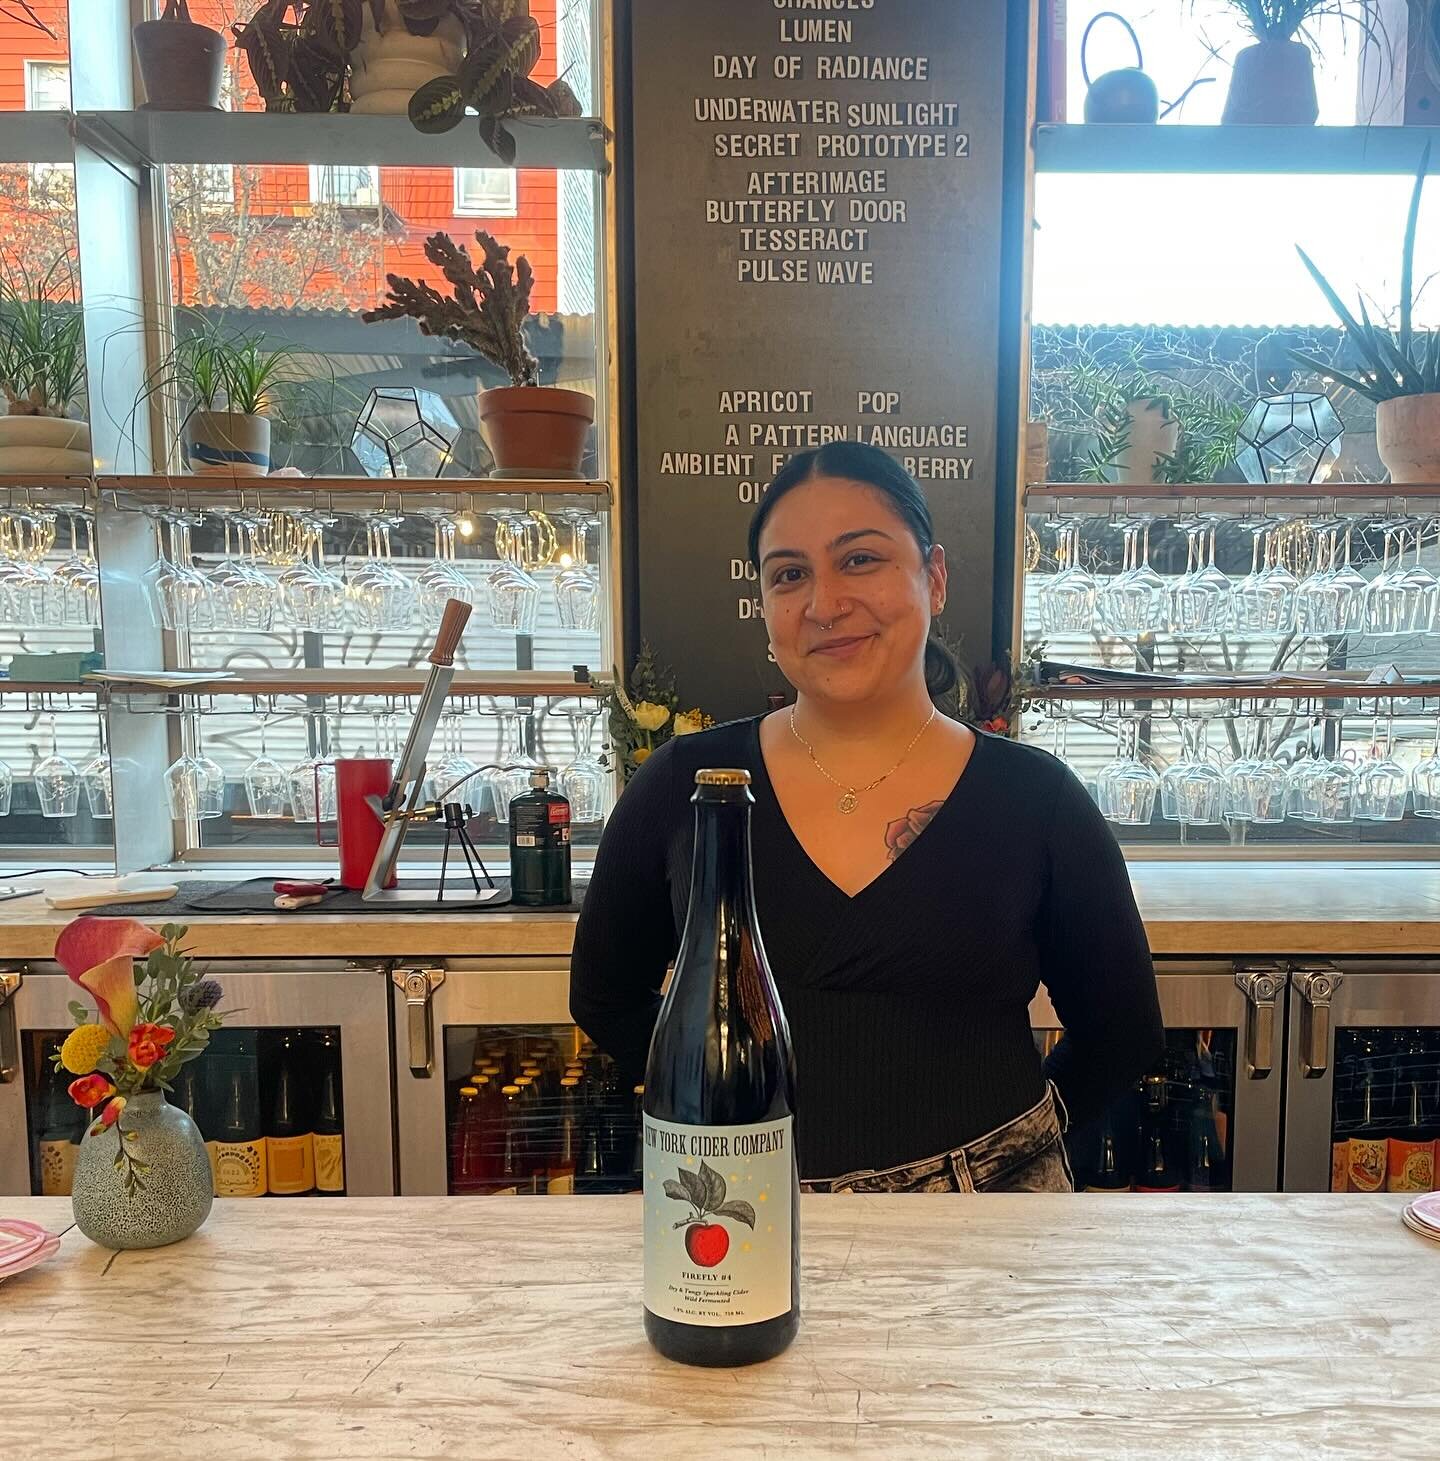 We&rsquo;ve been working hard to get the word out about @nyciderco wild-fermented, extra dry artisanal ciders. It&rsquo;s especially gratifying when they find a home in a venue whose mission aligns harmoniously with our own. The Taproom at Grimm Arti